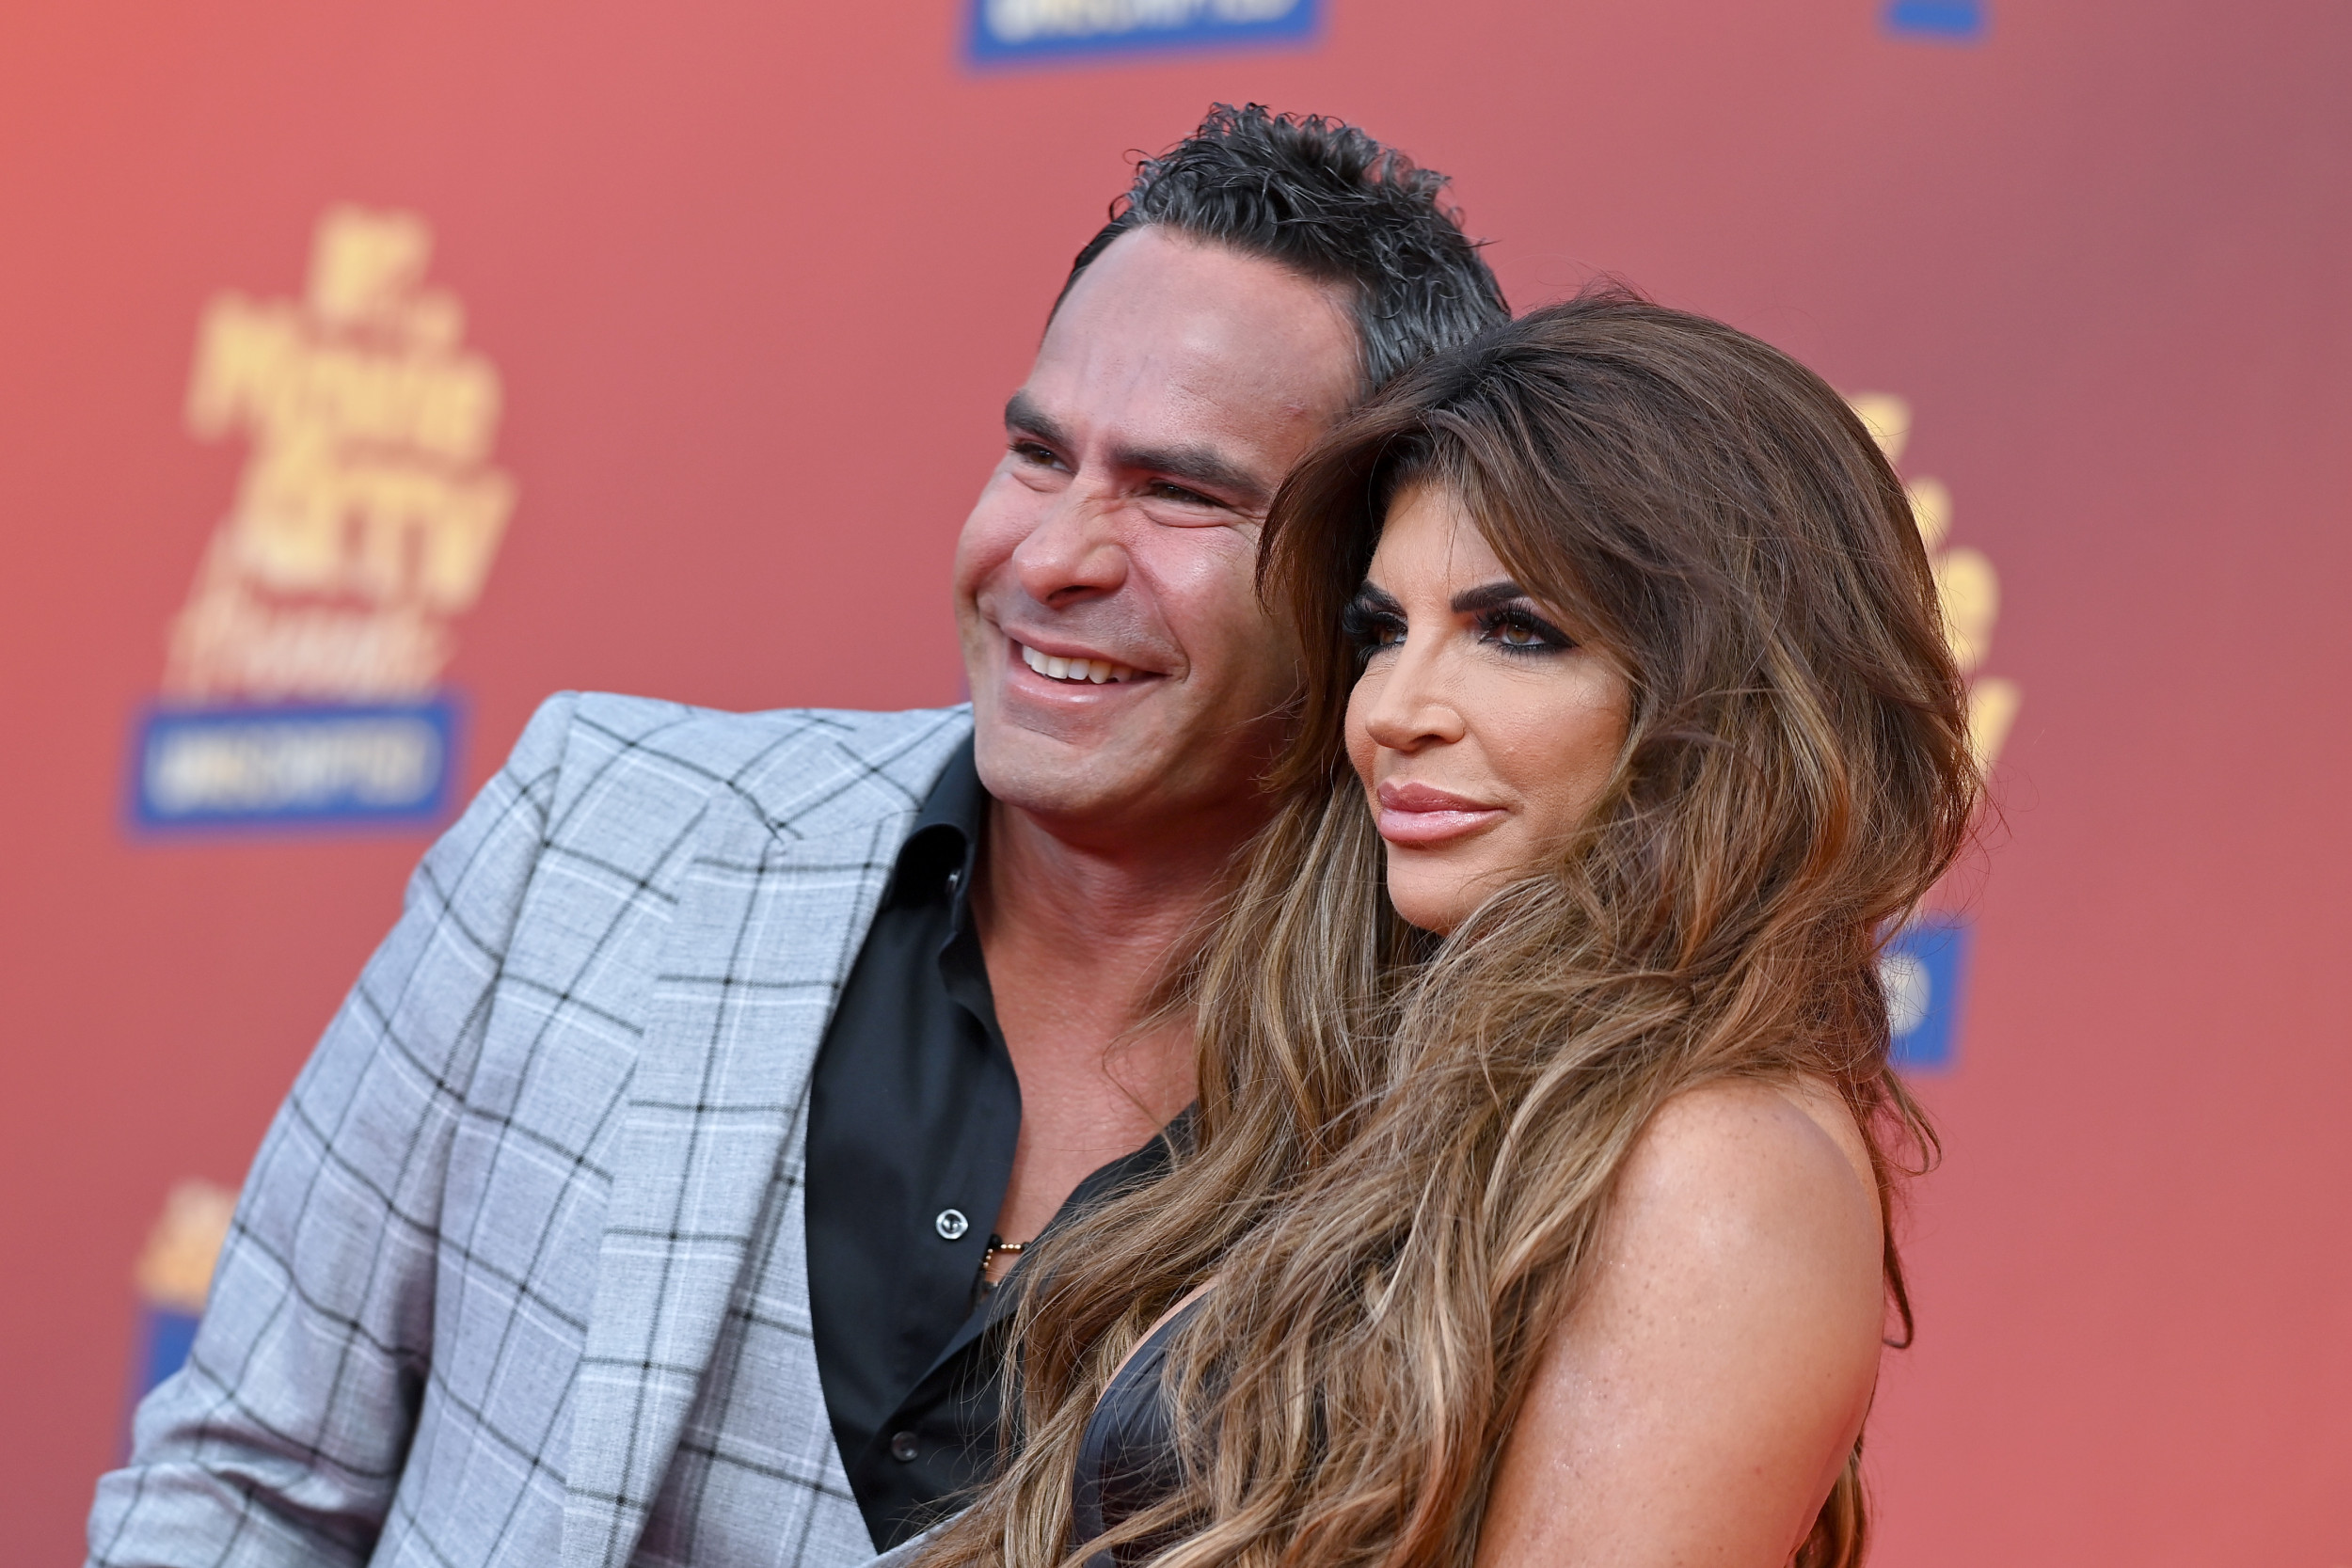 RHONJ Star Teresa Giudice Details Hot Sex Life With Luis in NSFW Chat image